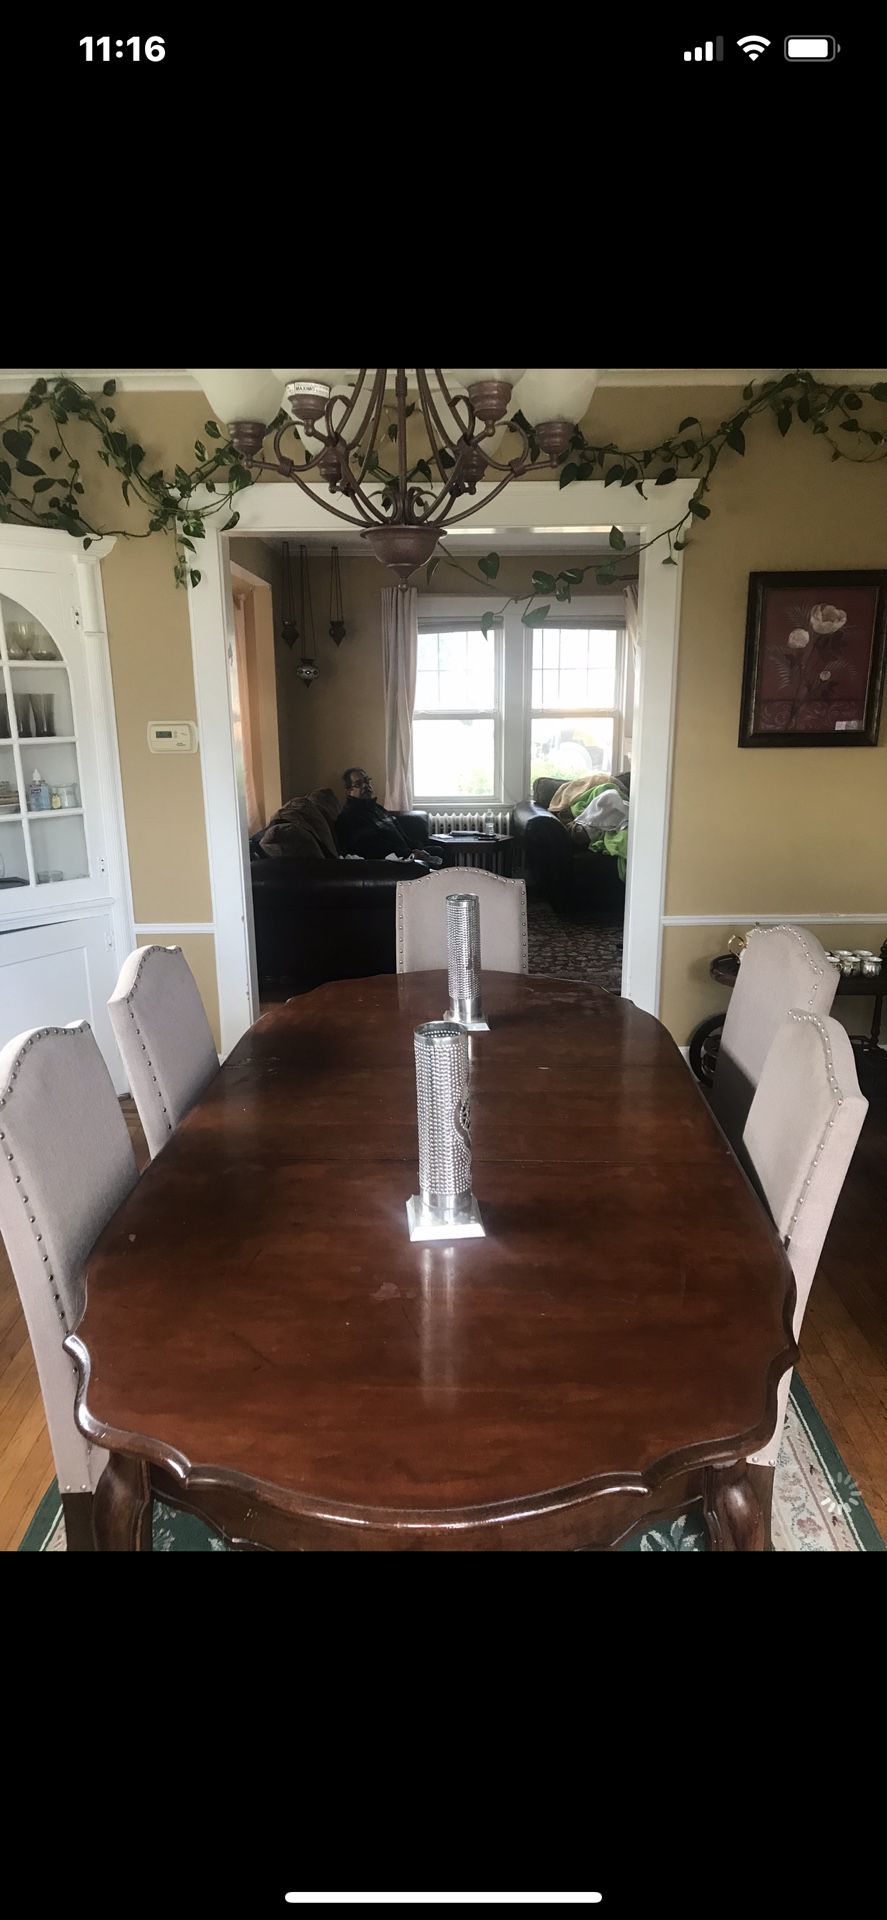 Dining table with five chairs Dining buffet table Coffee tray Plant. Pick up only cash only